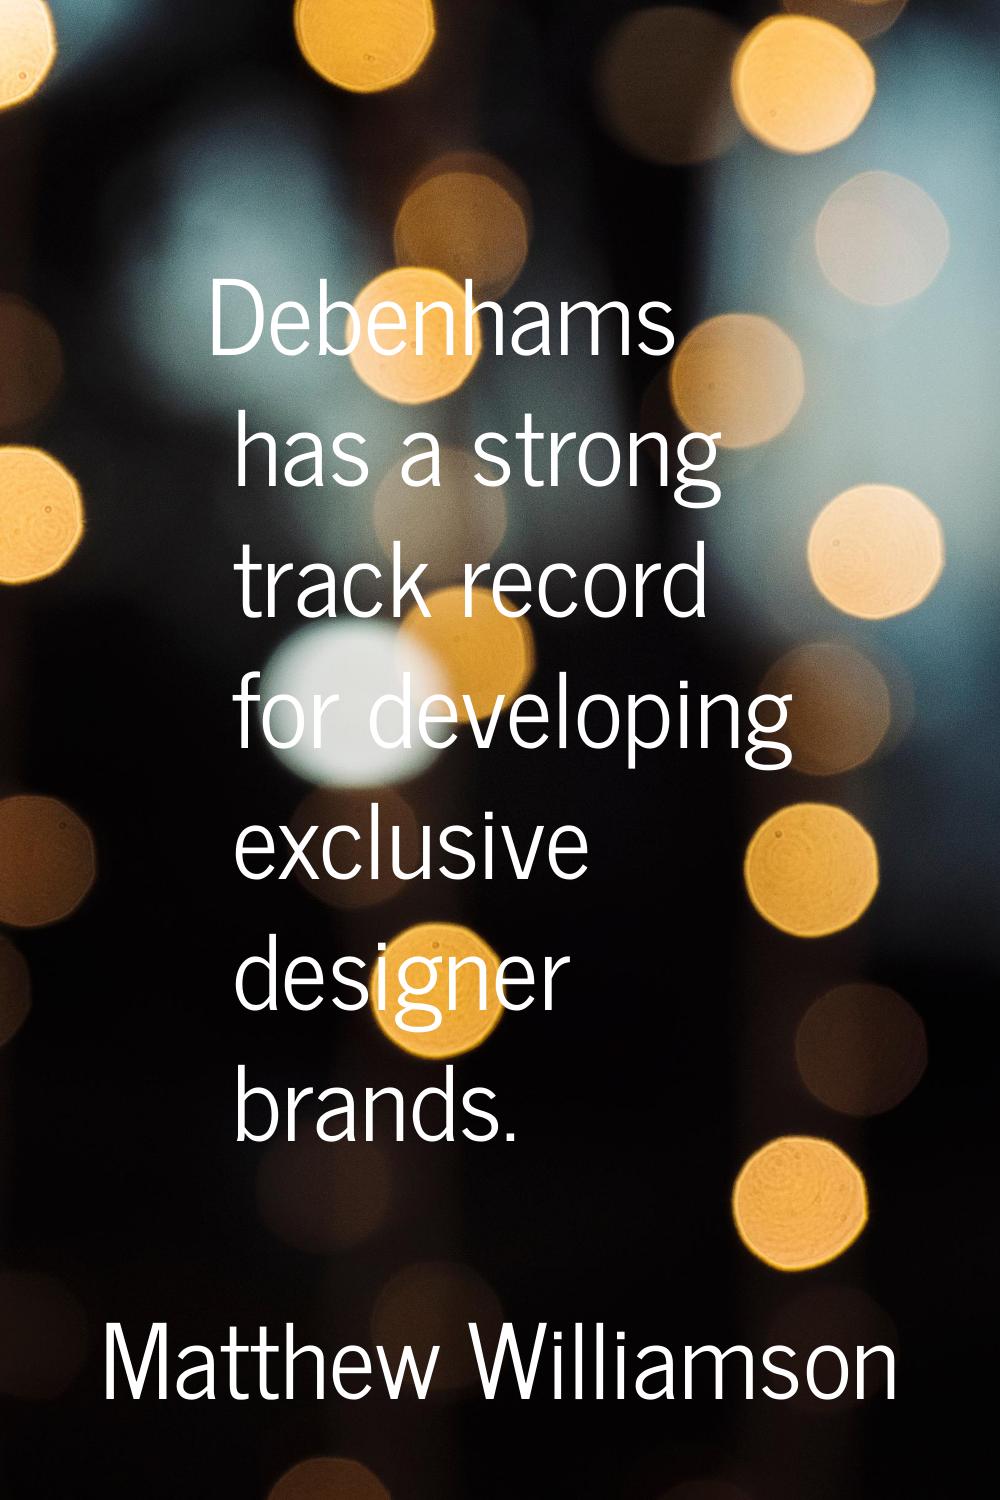 Debenhams has a strong track record for developing exclusive designer brands.